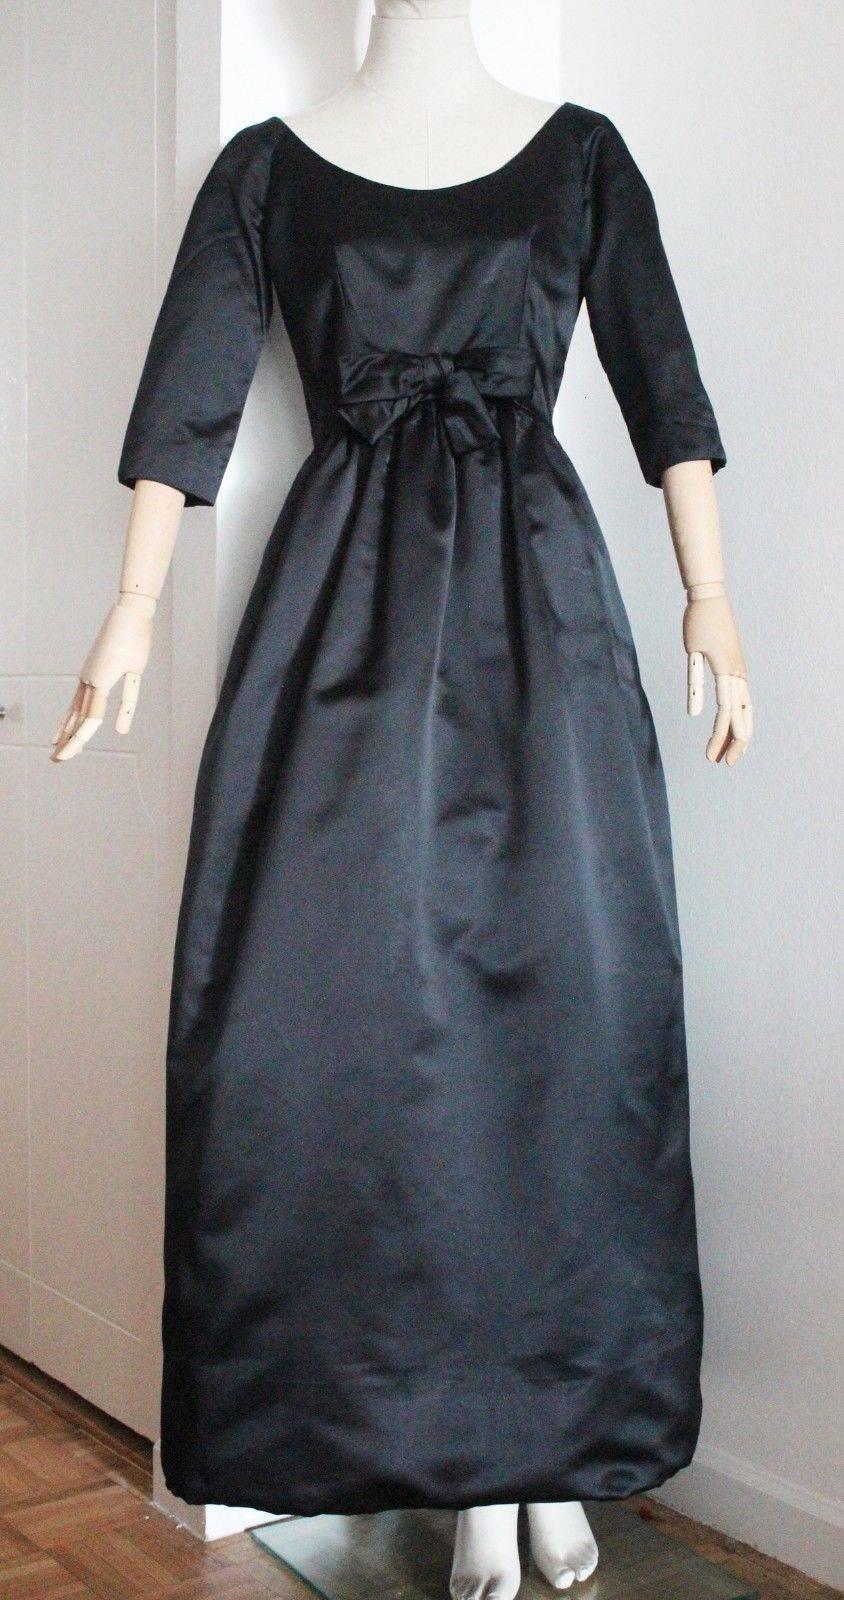 A rare and iconic 1958 Yves Saint-Laurent for Christian evening dress in black satin from the Automne-Hiver collection,.

Yves Saint-Laurent was barely 21 when he took over as head of design at Christian Dior,after Monsieur Dior's sudden death in